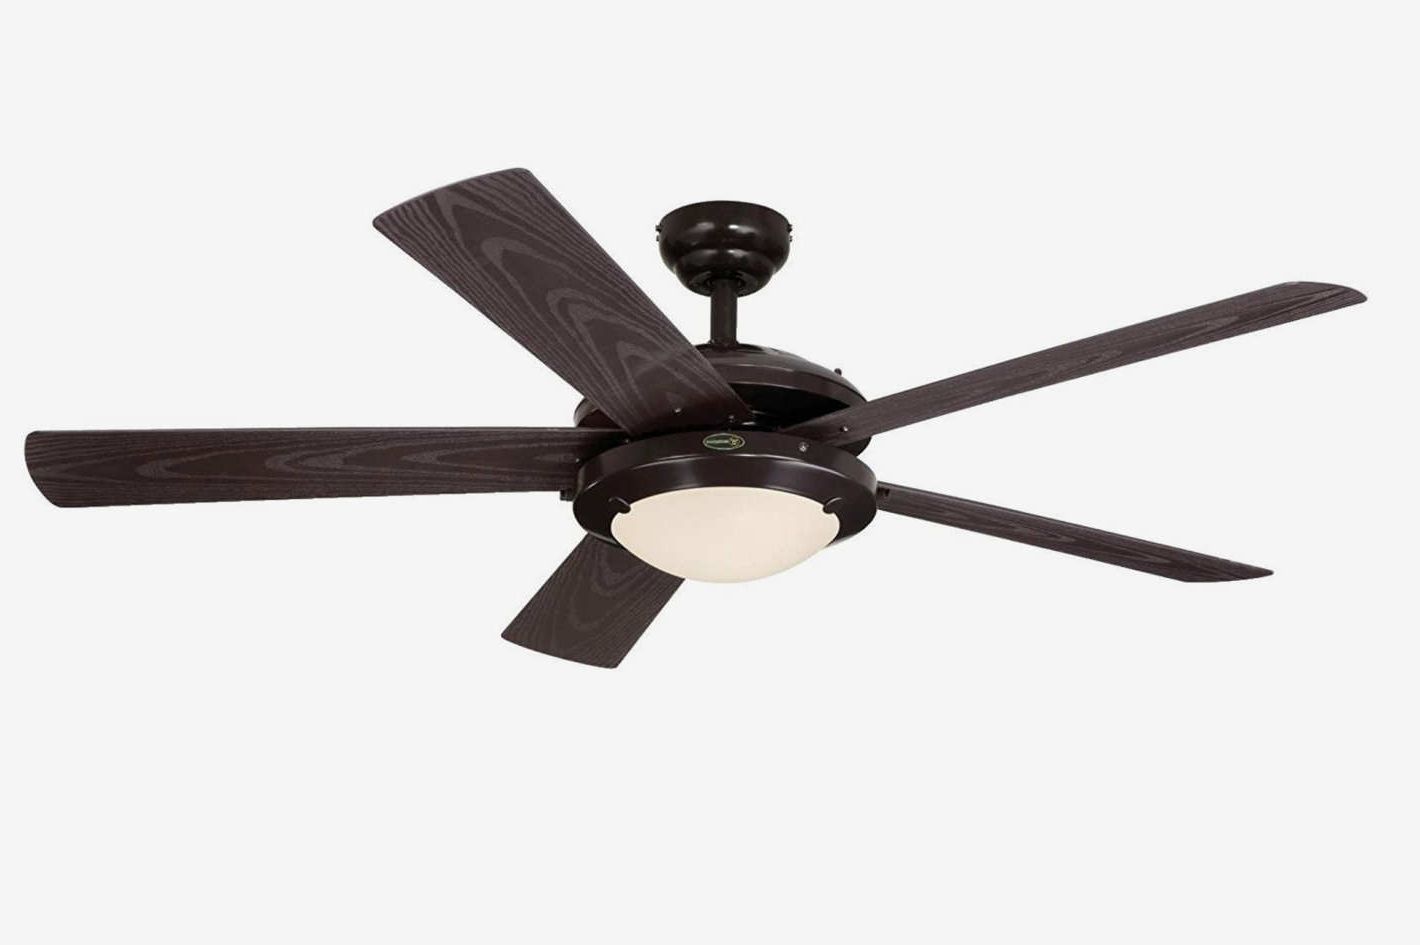 Fashionable The 9 Best Ceiling Fans On Amazon 2018 Throughout Outdoor Ceiling Fans Under $ (View 7 of 20)